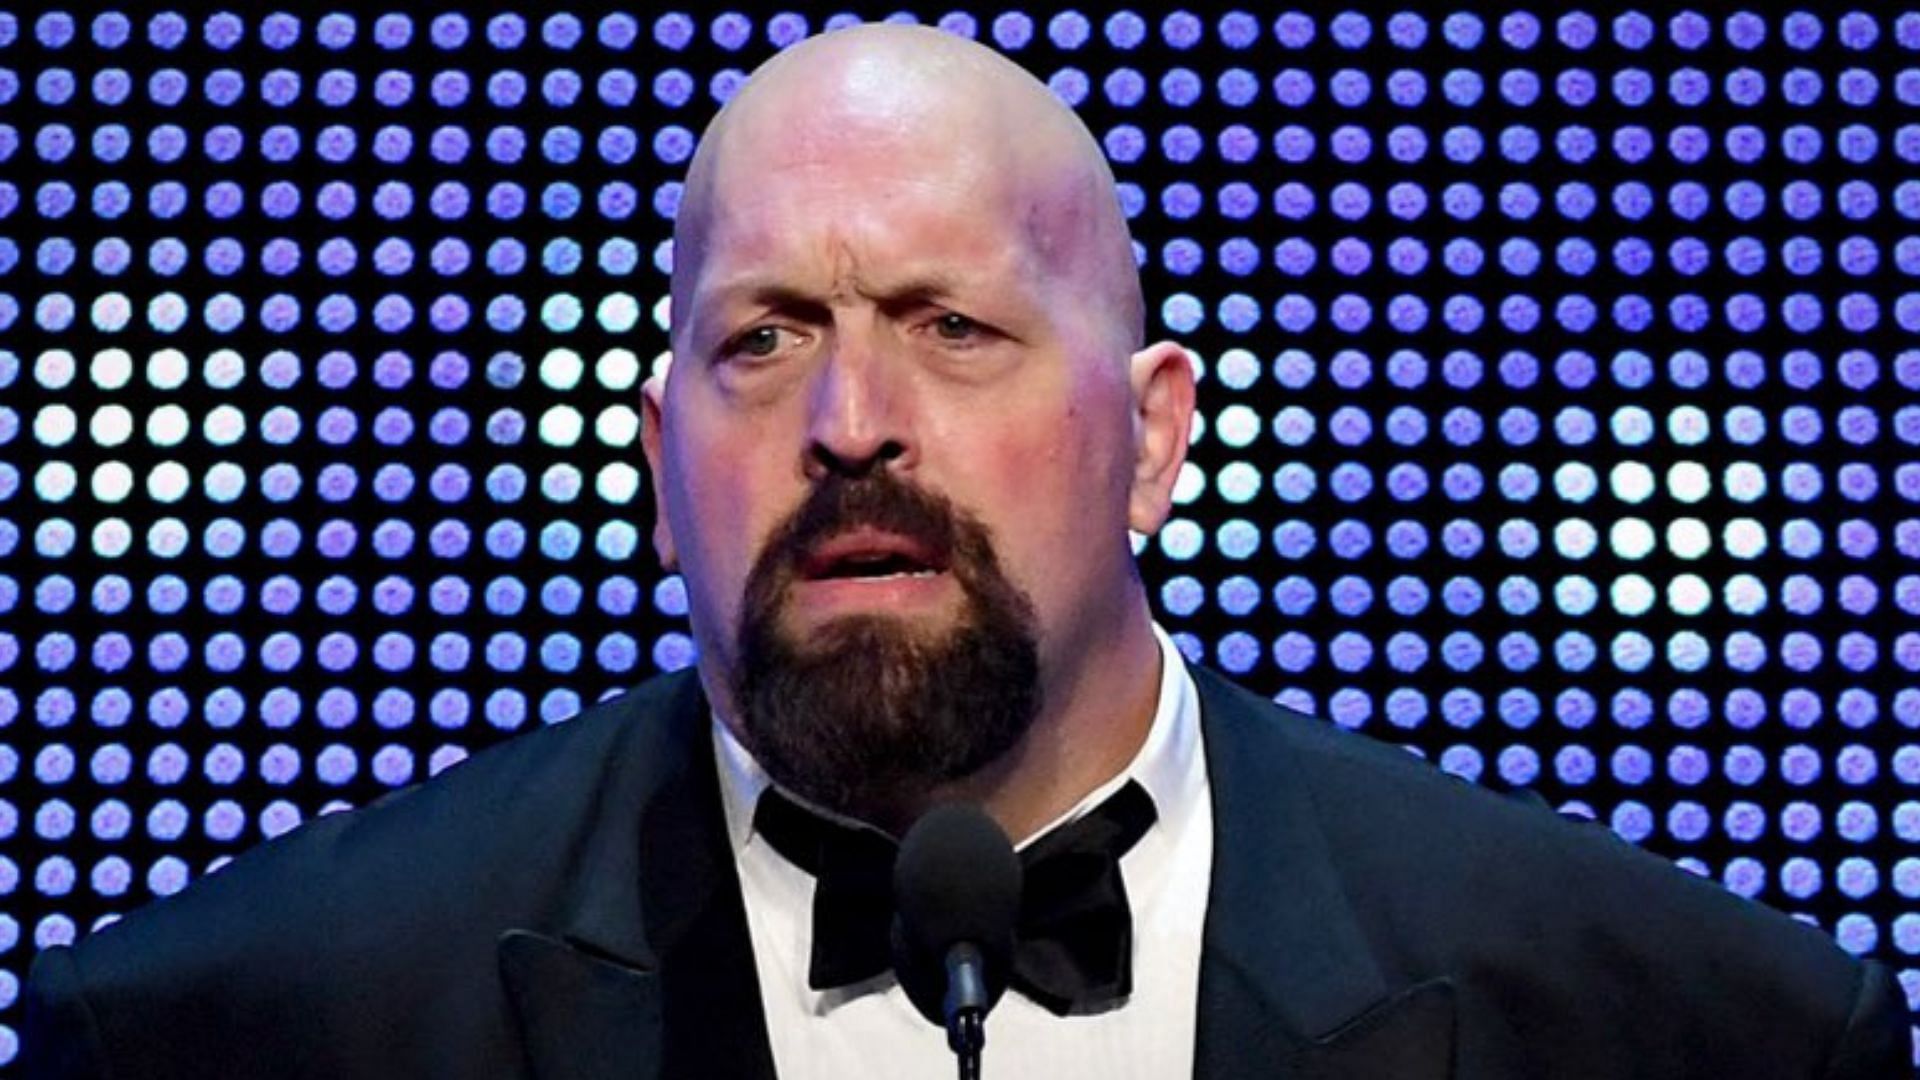 Paul Wight as Big Show at a WWE Hall of Fame induction ceremony